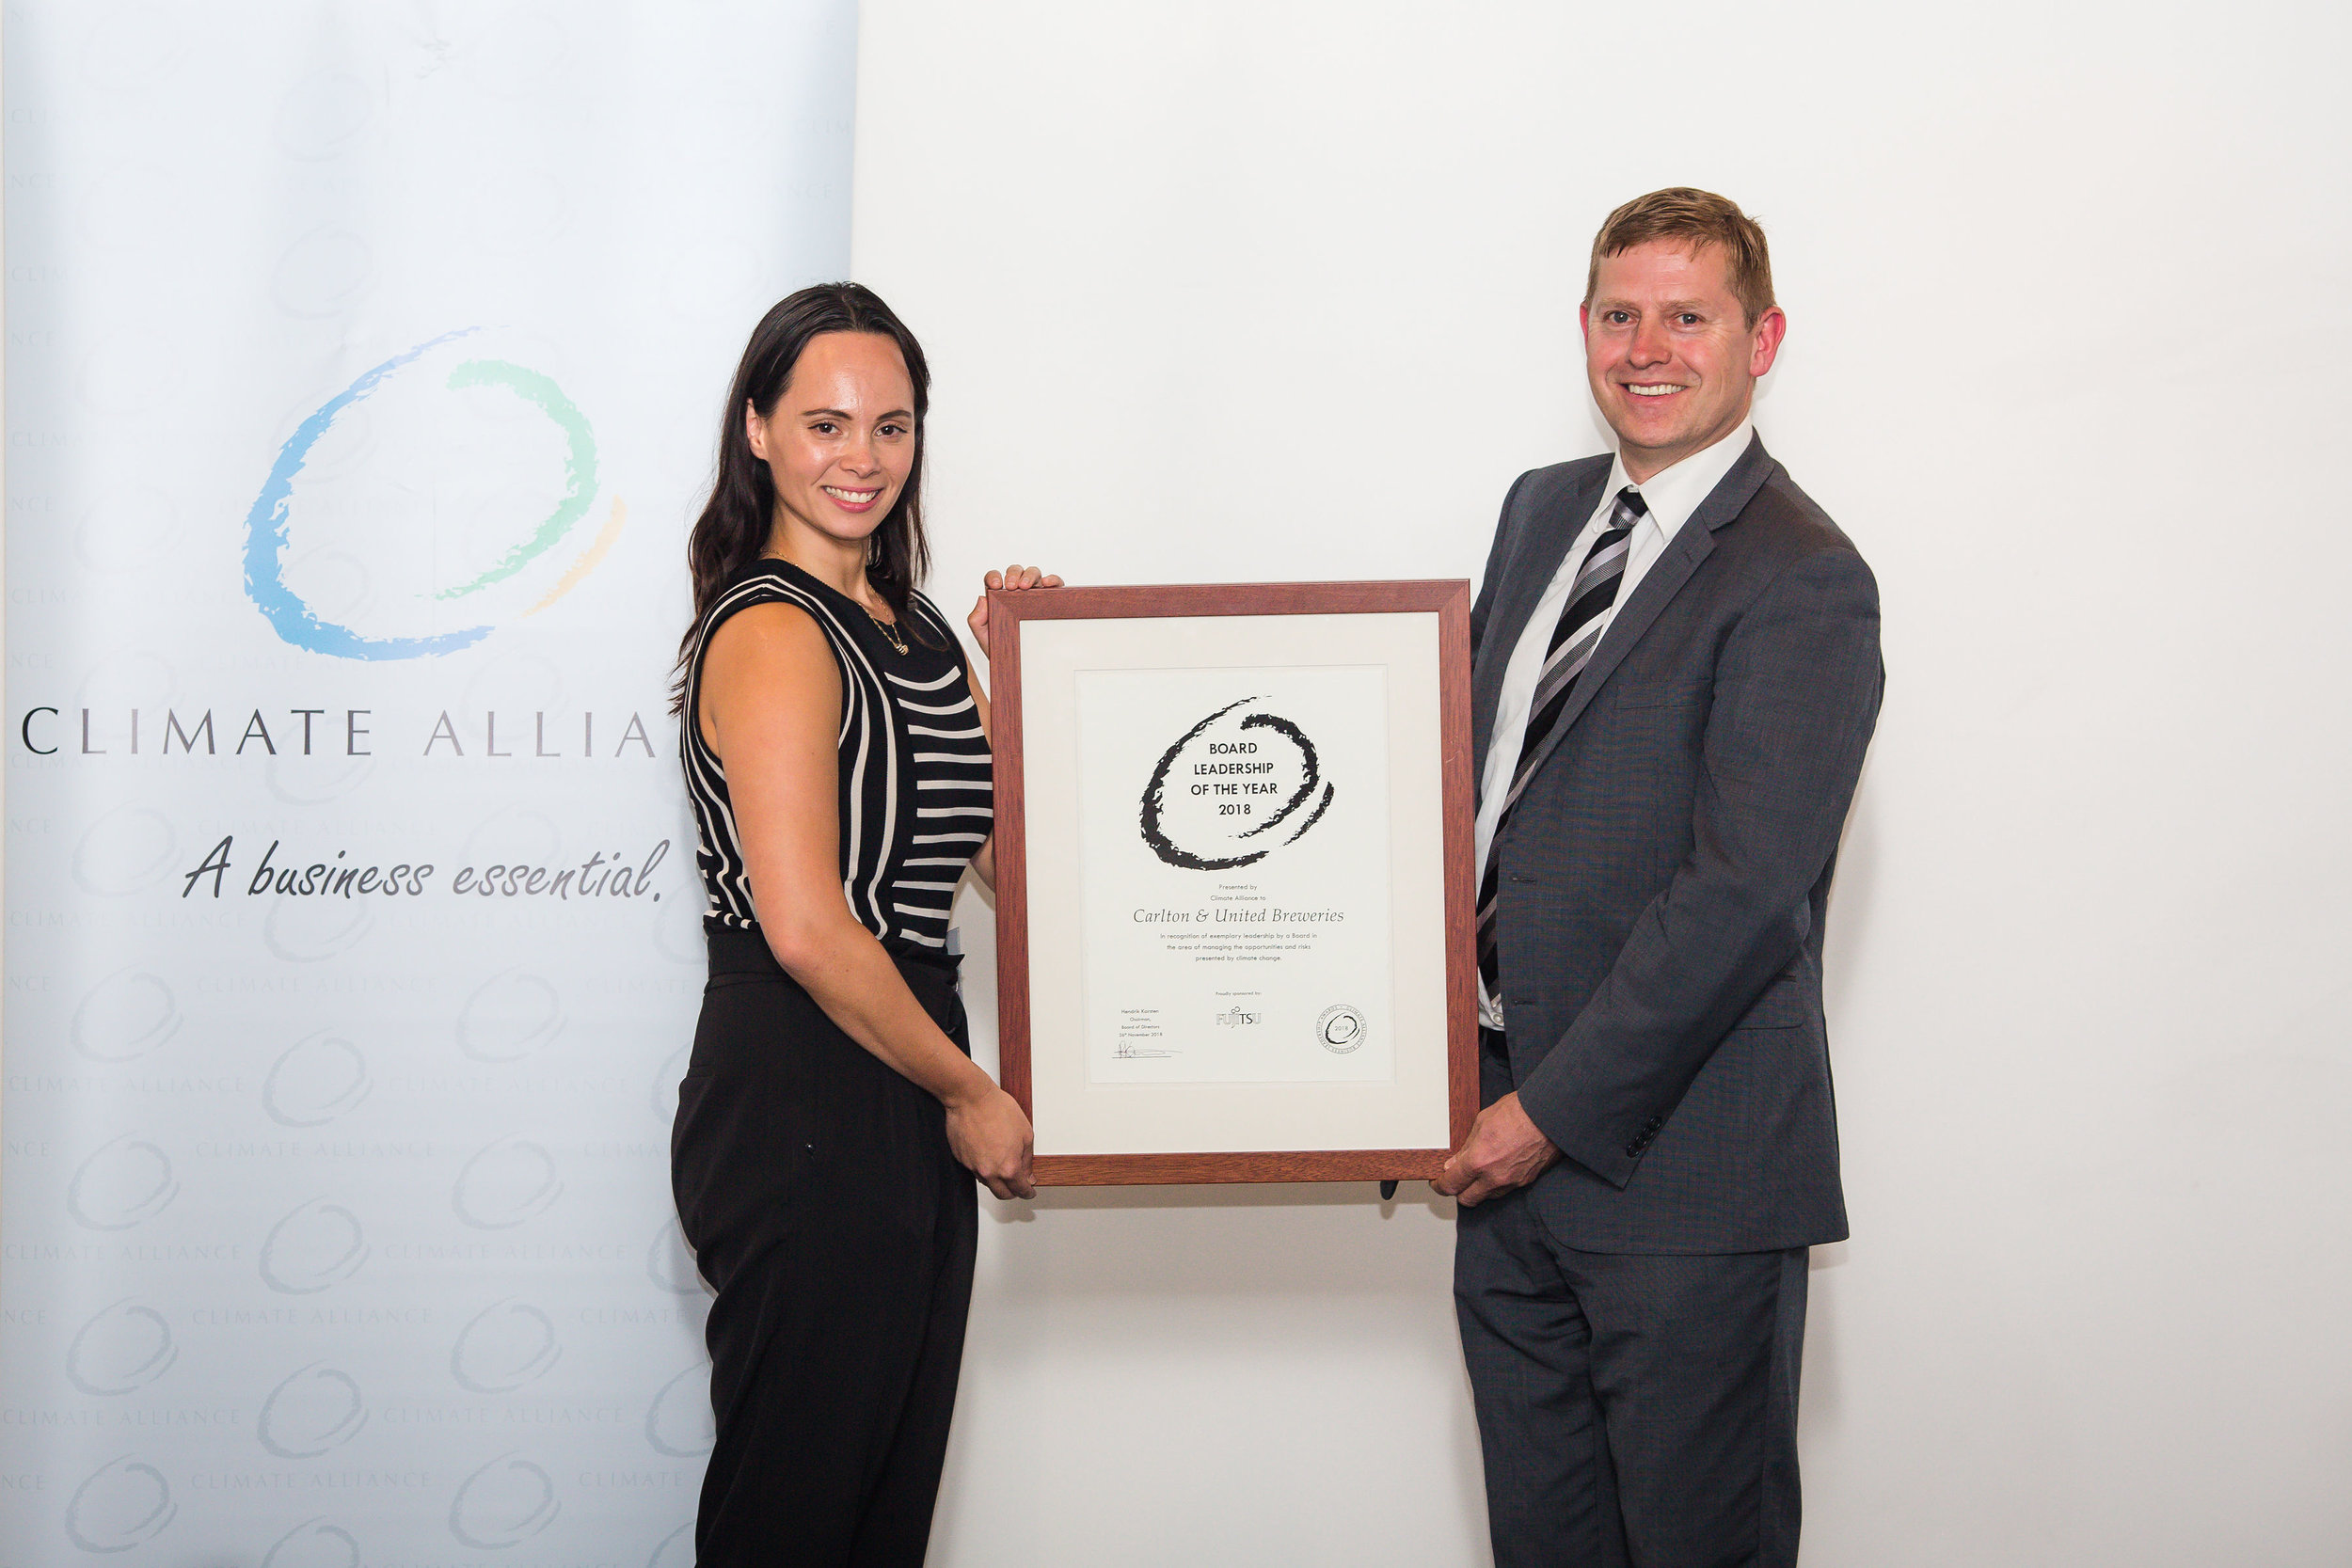  Board Leadership of the Year 2018 - Carlton &amp; United Breweries, represented by Kirsten Sturzaker, Sustainability Manager at CUB with Turlough Guerin, Chairman of the Climate Alliance Board of Advisors. 